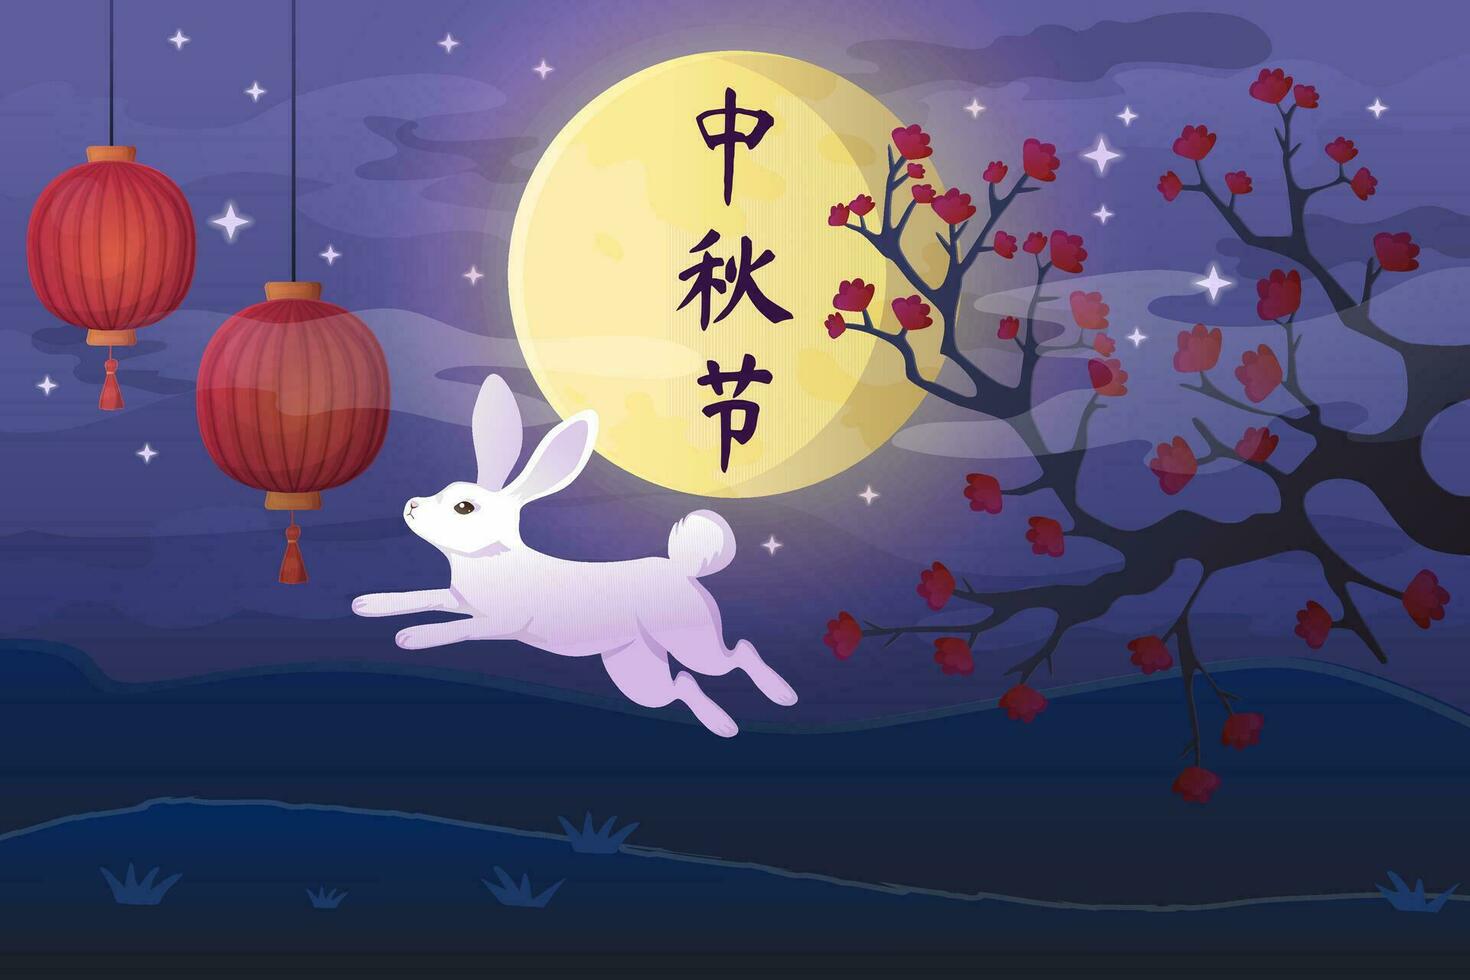 Cute Happy mid autumn festival banner. With flying bunny, blooming tree and chinese lanter in the night sky with full moon. vector